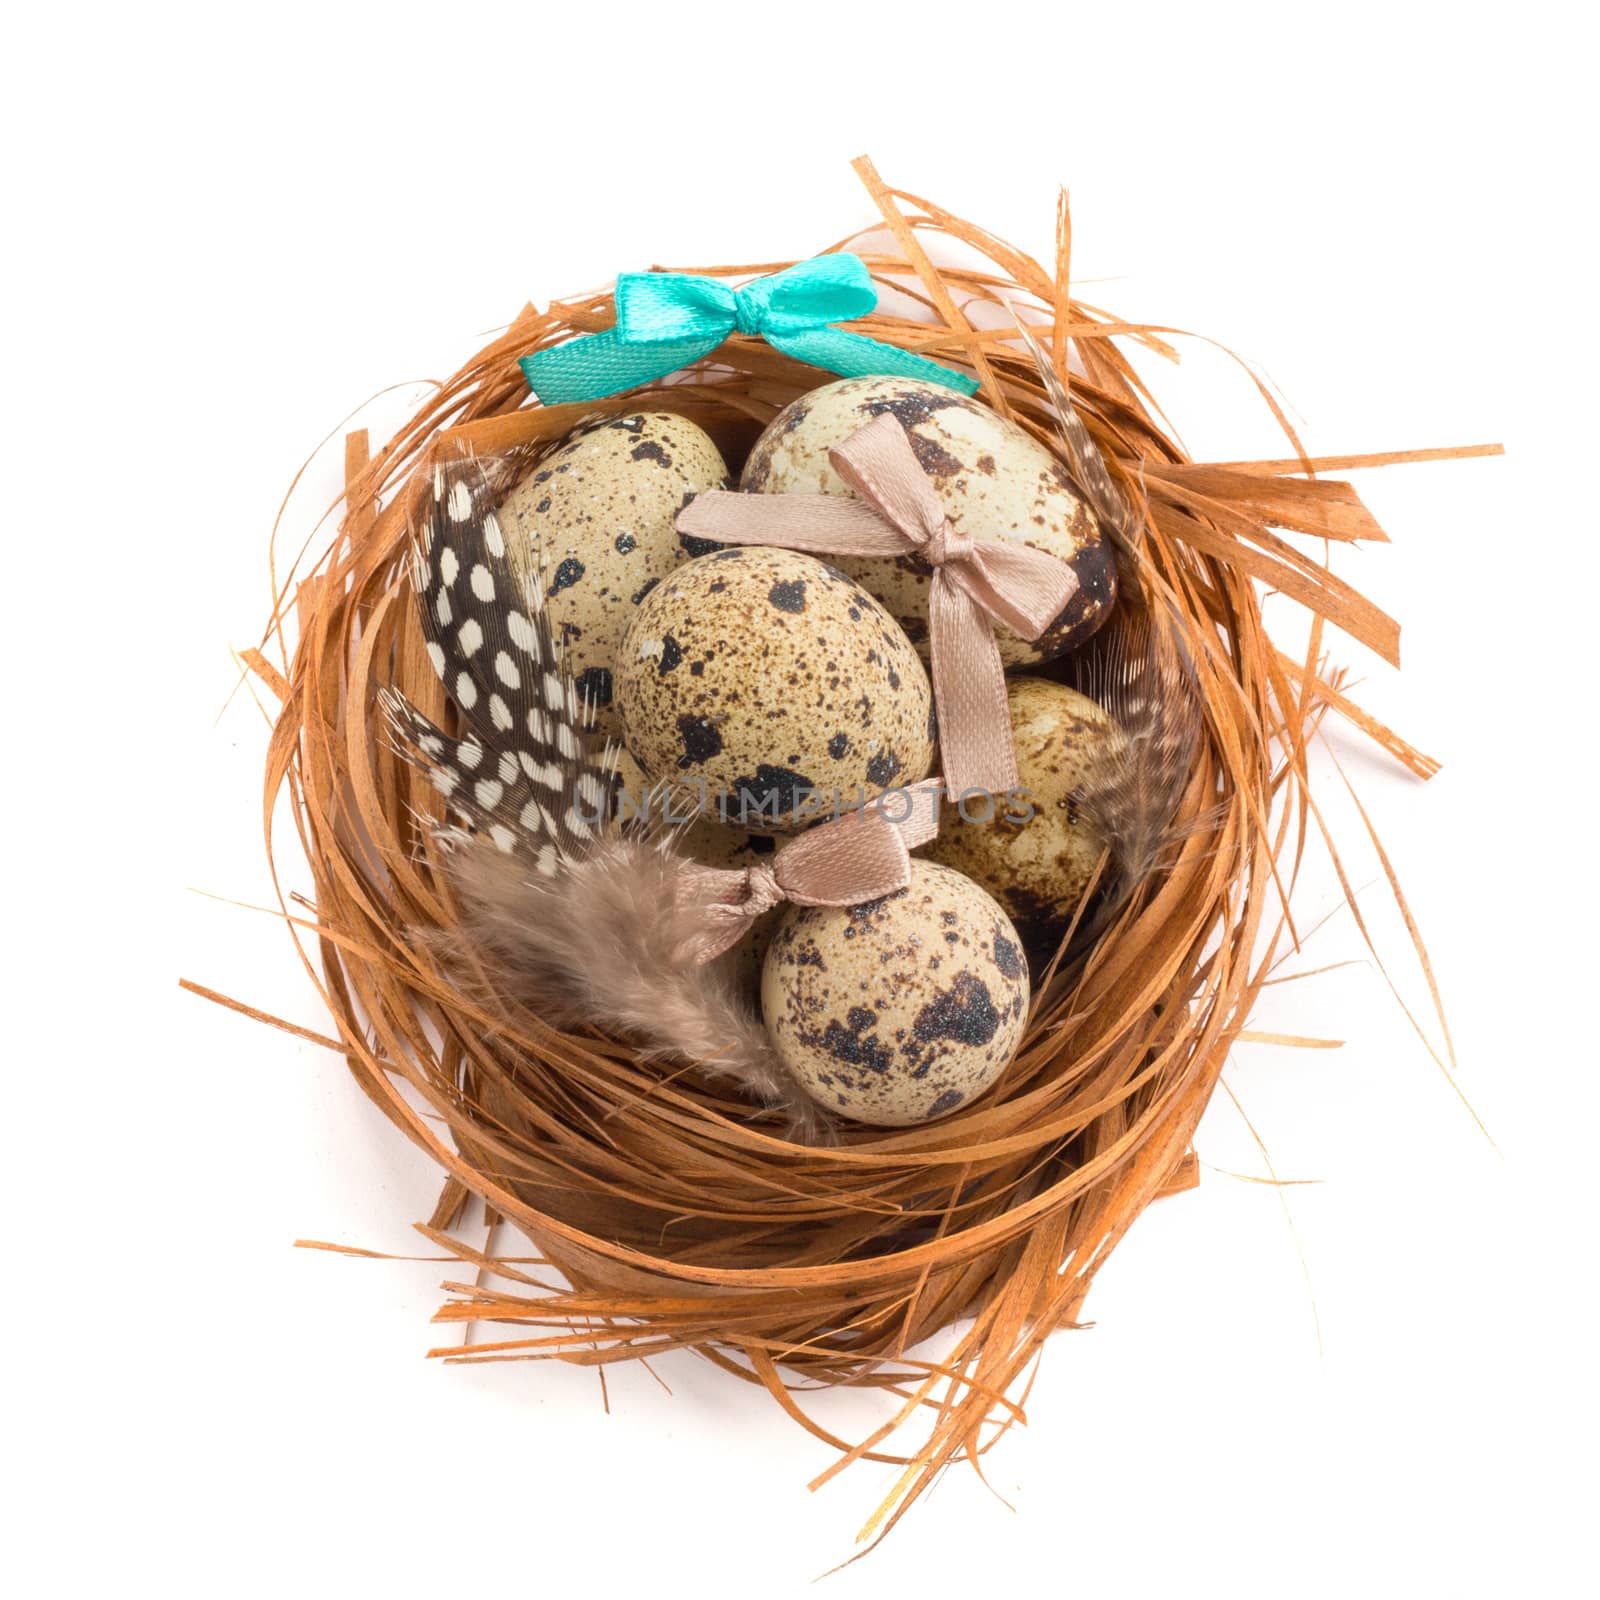 Happy Easter holiday greeting symbol natural wooden grass nest with quail eggs studio isolated on white background